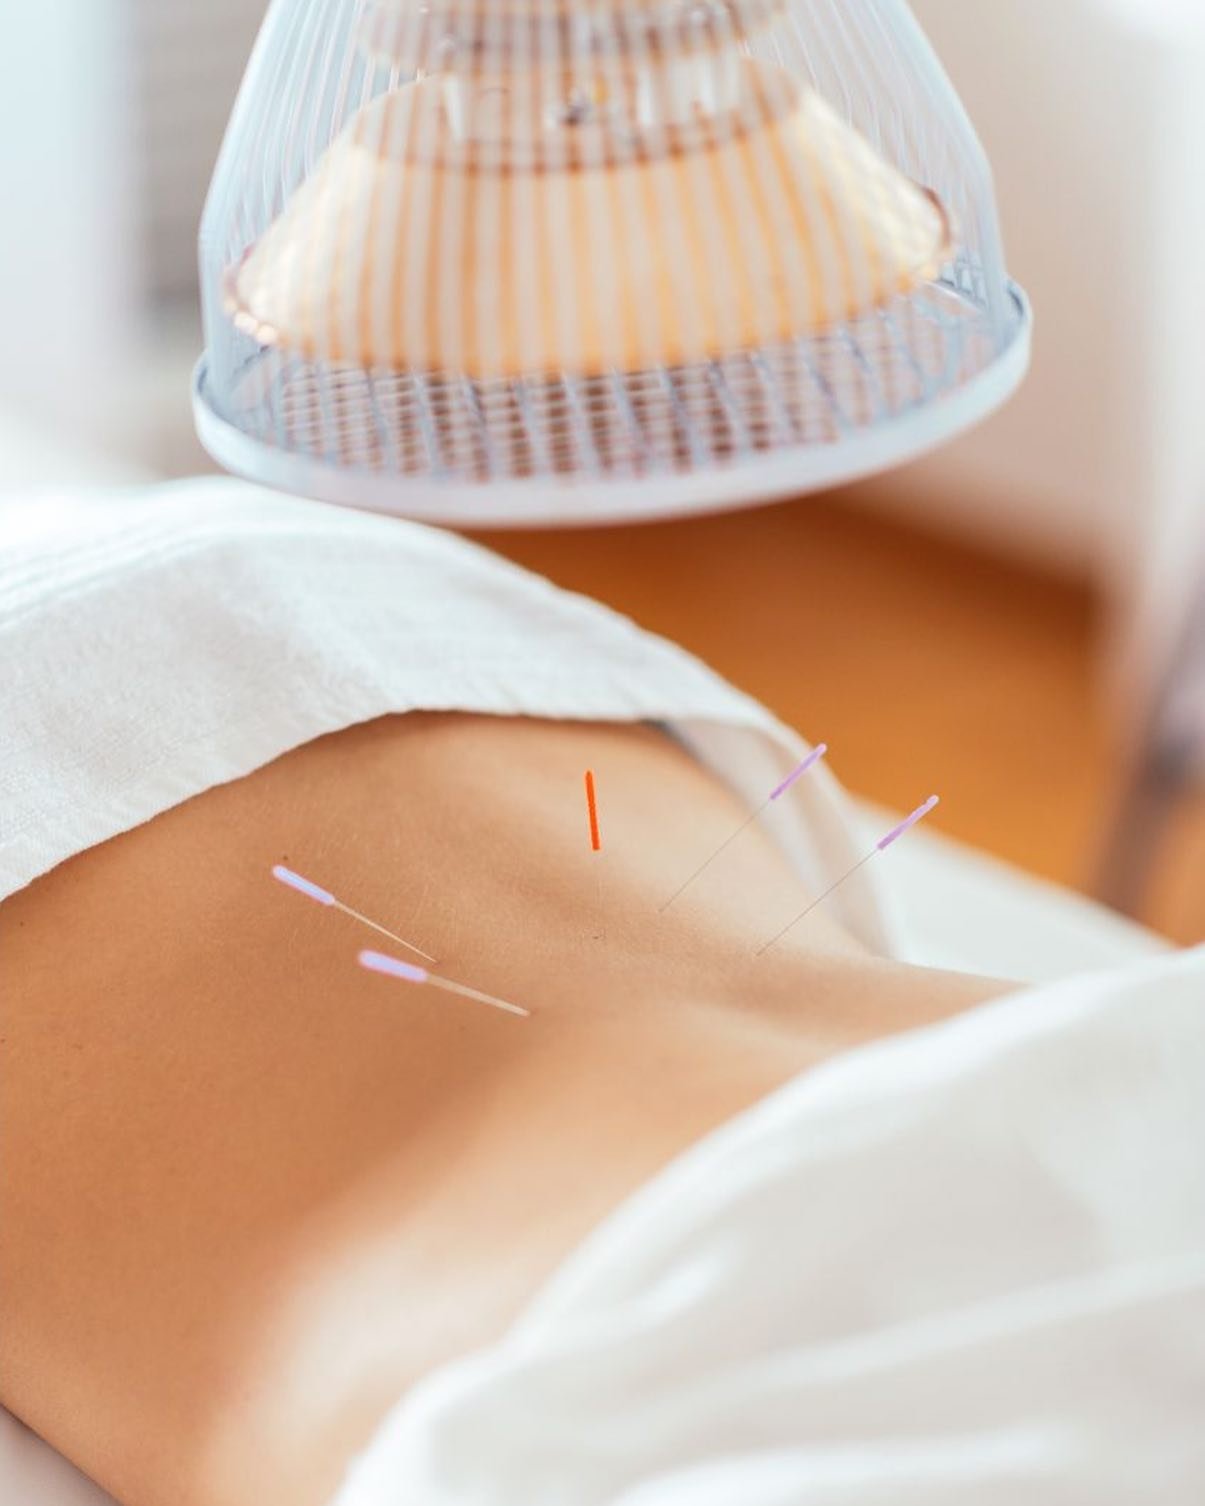 Acupuncture has been practiced in China for thousands of years. Chinese medicine practitioners believe the human body has more than 2,000 acupuncture points. These points are linked through meridians or energy channels.  The use of these points impro